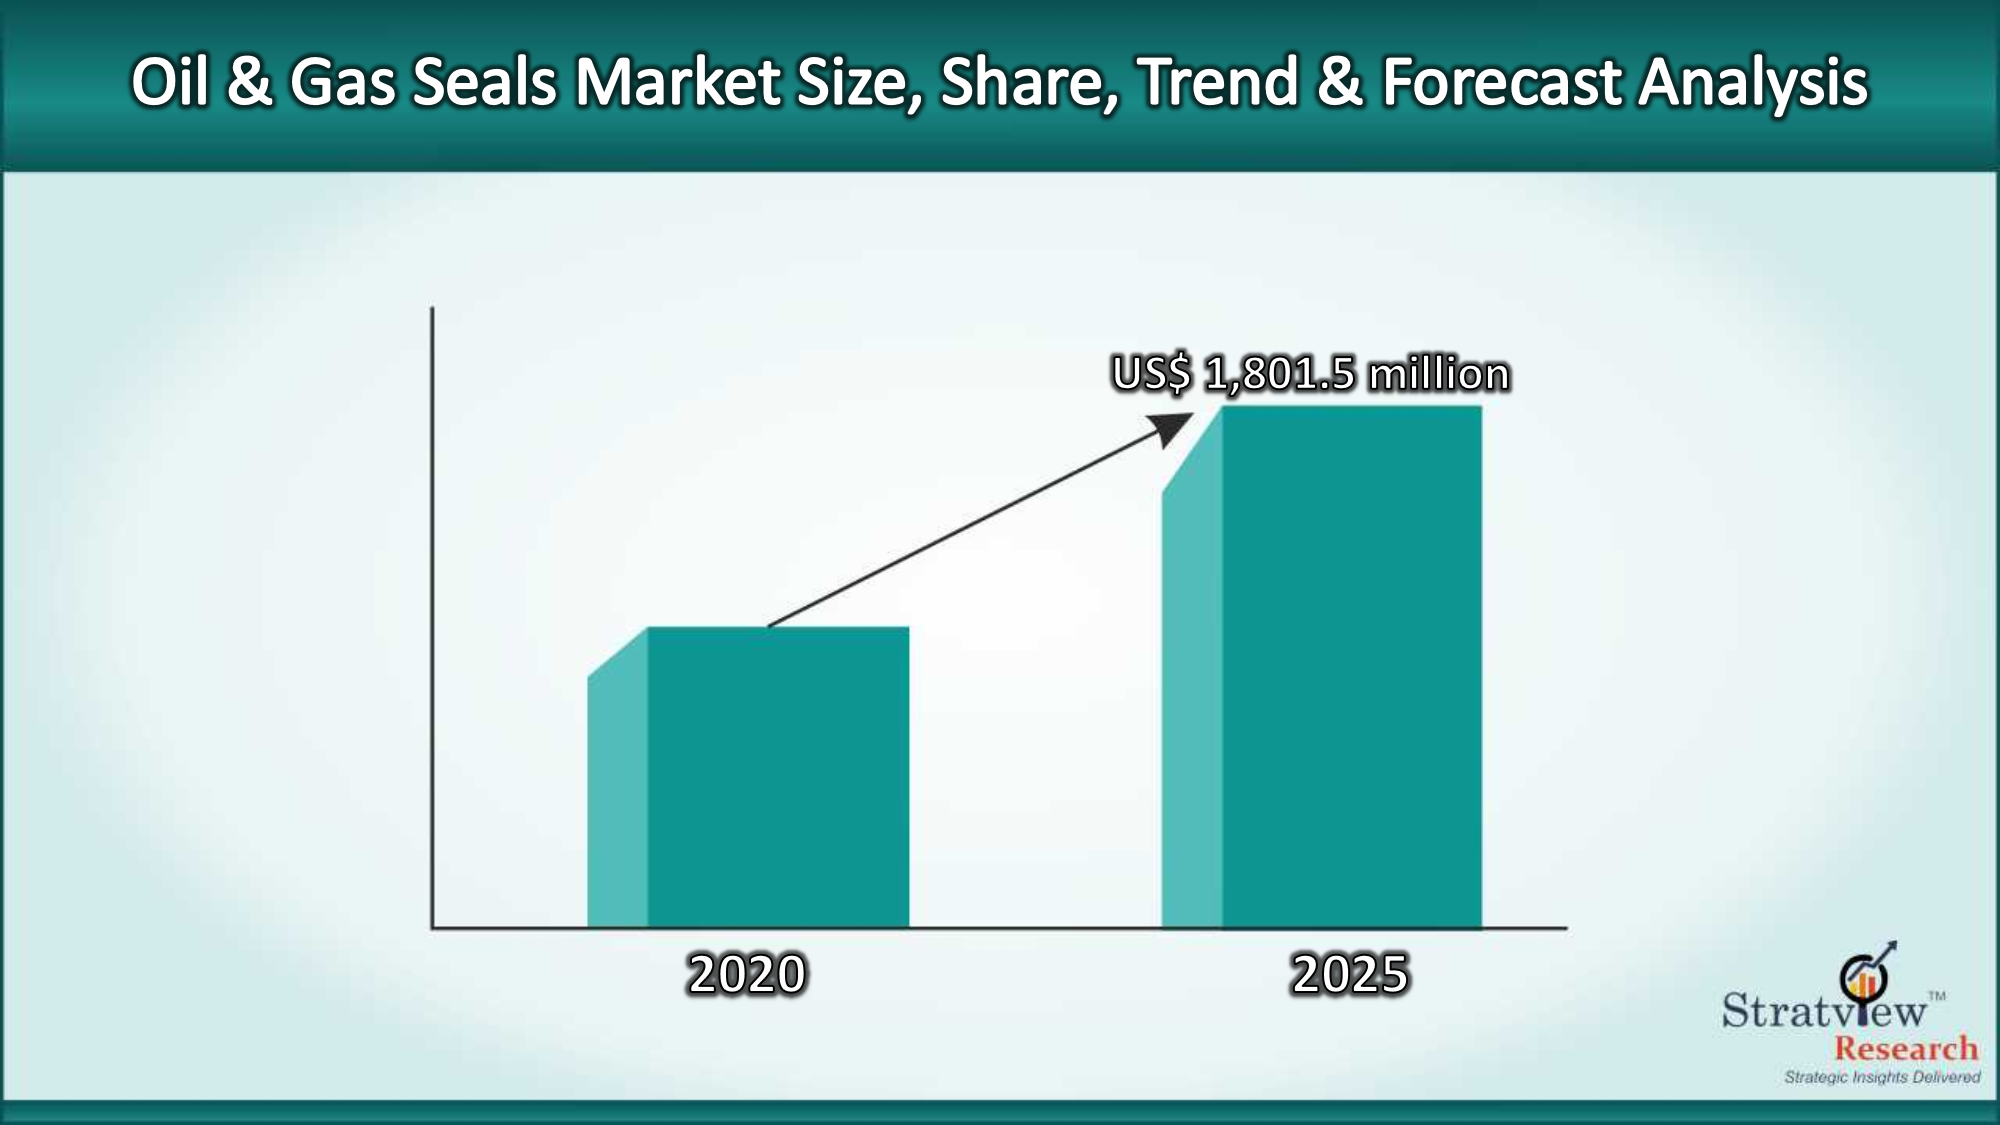 Oil & Gas Seals Market Size to experience an impressive growth of 4.2%  